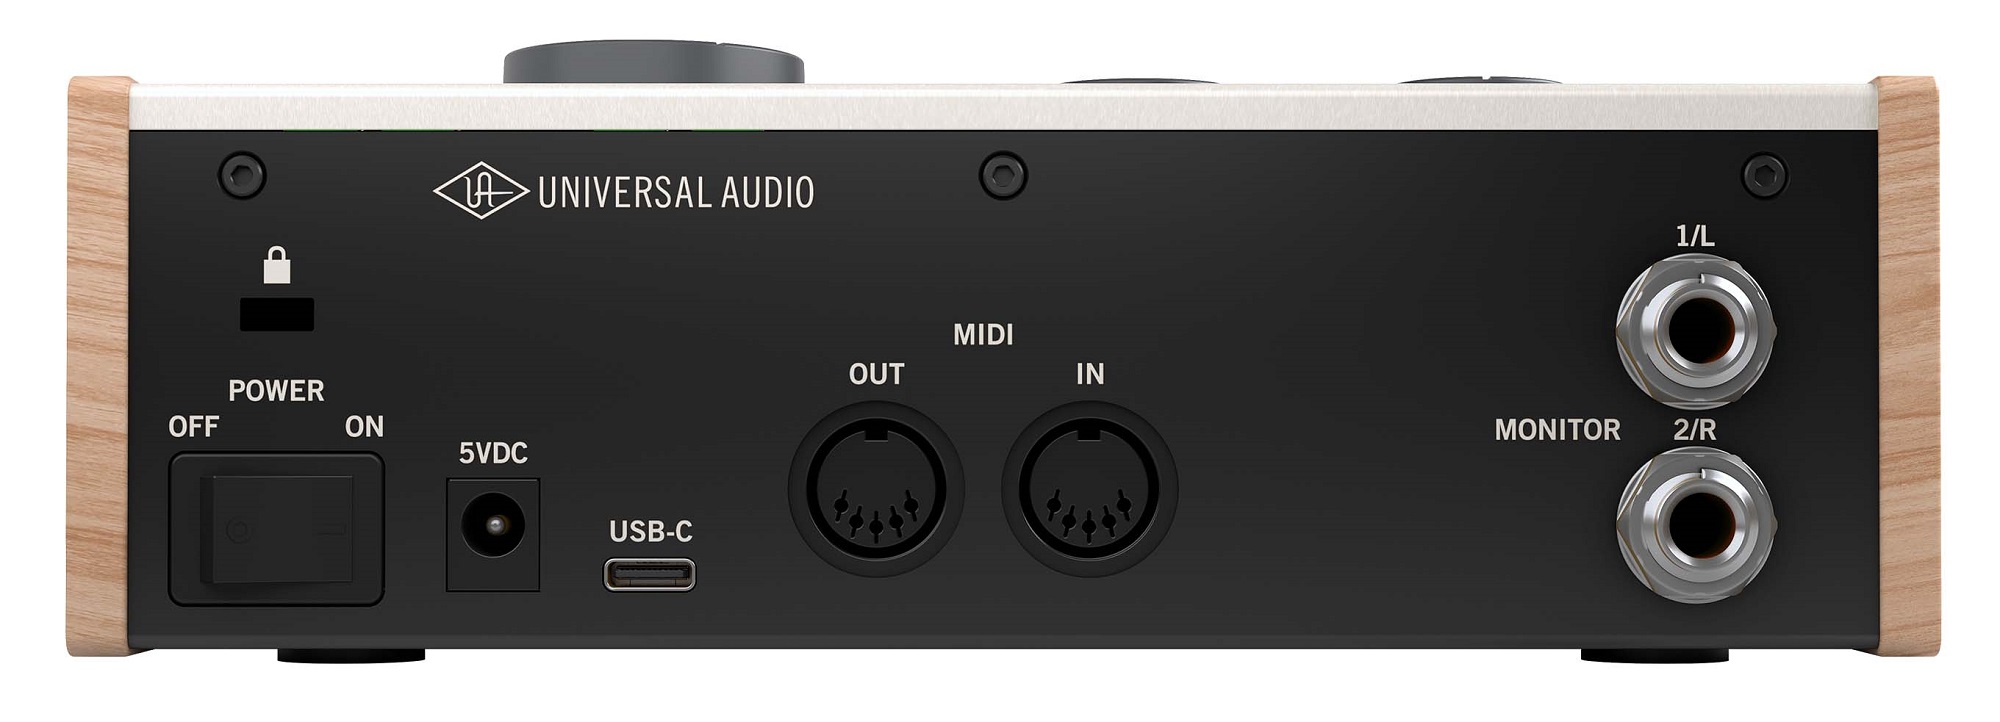 Universal Audio Volt 276 Studio Pack review: Easy audio for